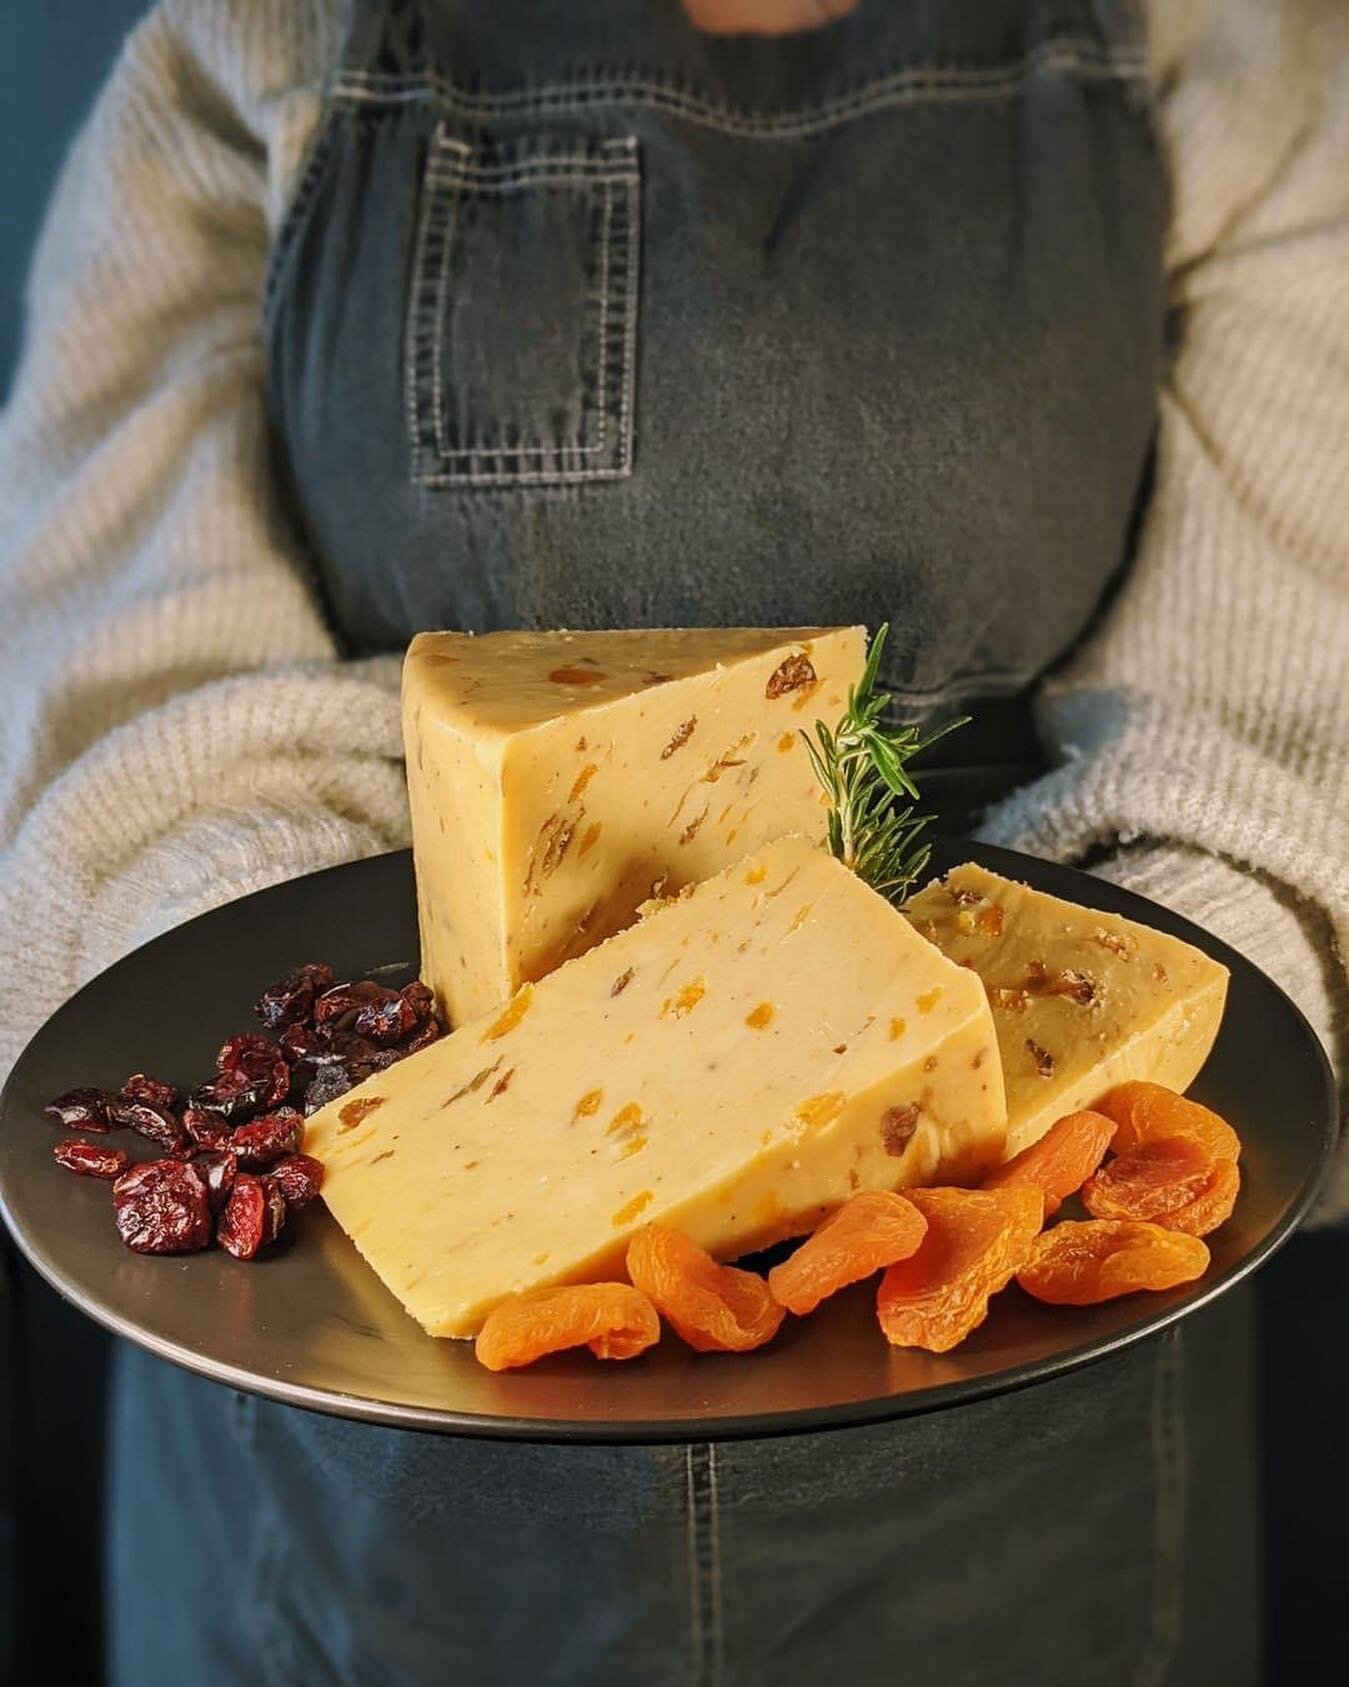 Dried fruits that are used in traditional Moroccan cooking combined with creamy English cheddar.....have we got your attention? 😋

Flavours of apricots, black pepper, crushed red chilli, raisins and paprika take this cheese to the next level. Marrak